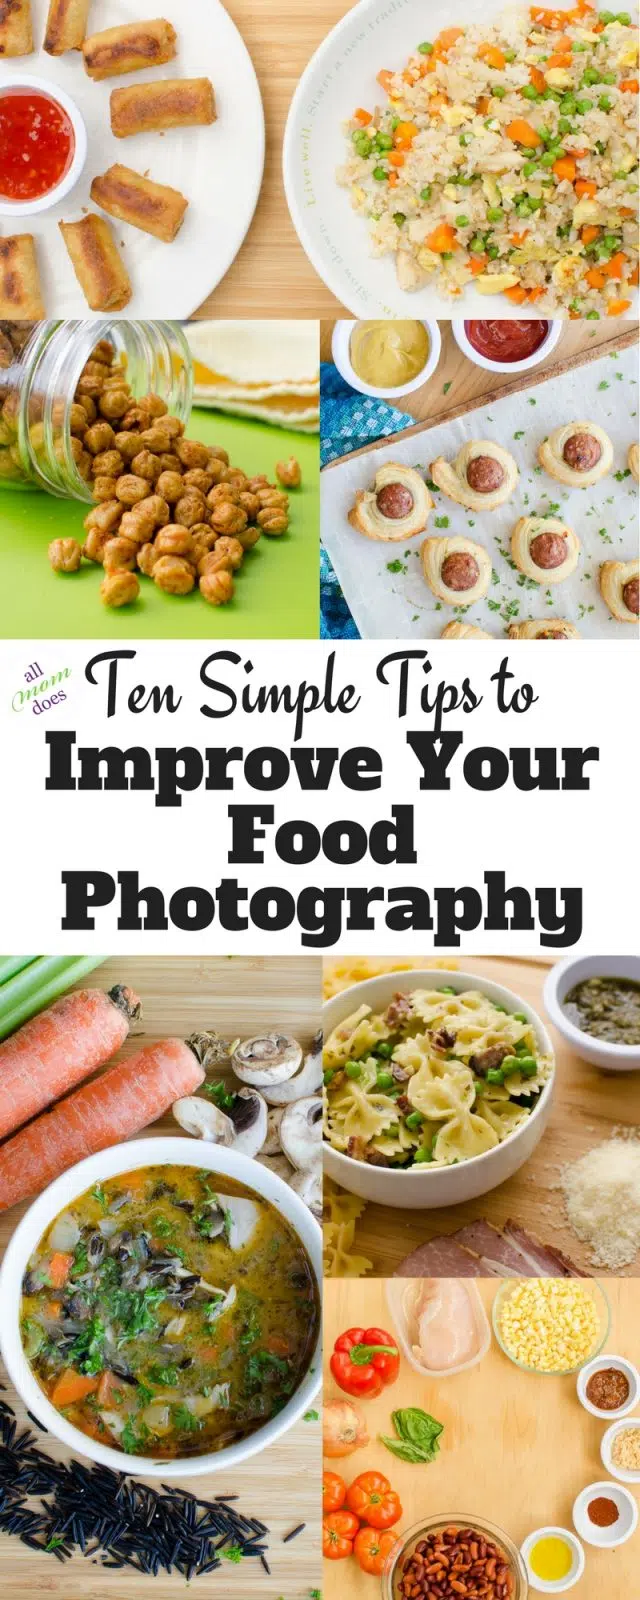 Food Photography Tips - Take better pictures of your food. #photography #foodphotography #foodblogger